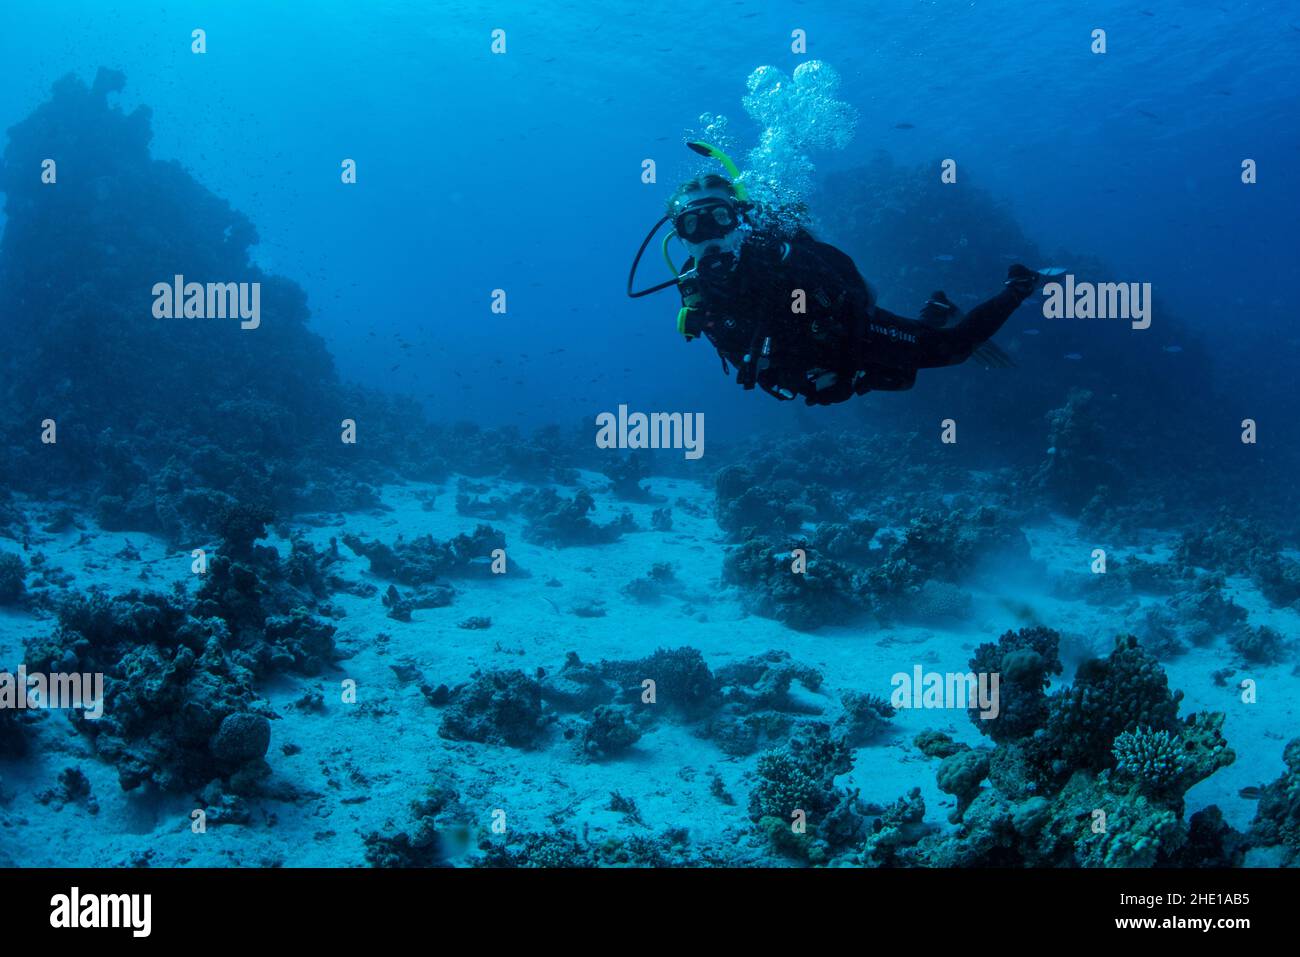 A scuba diver in the Red Sea off the coast of Hurghada, Egypt. Stock Photo